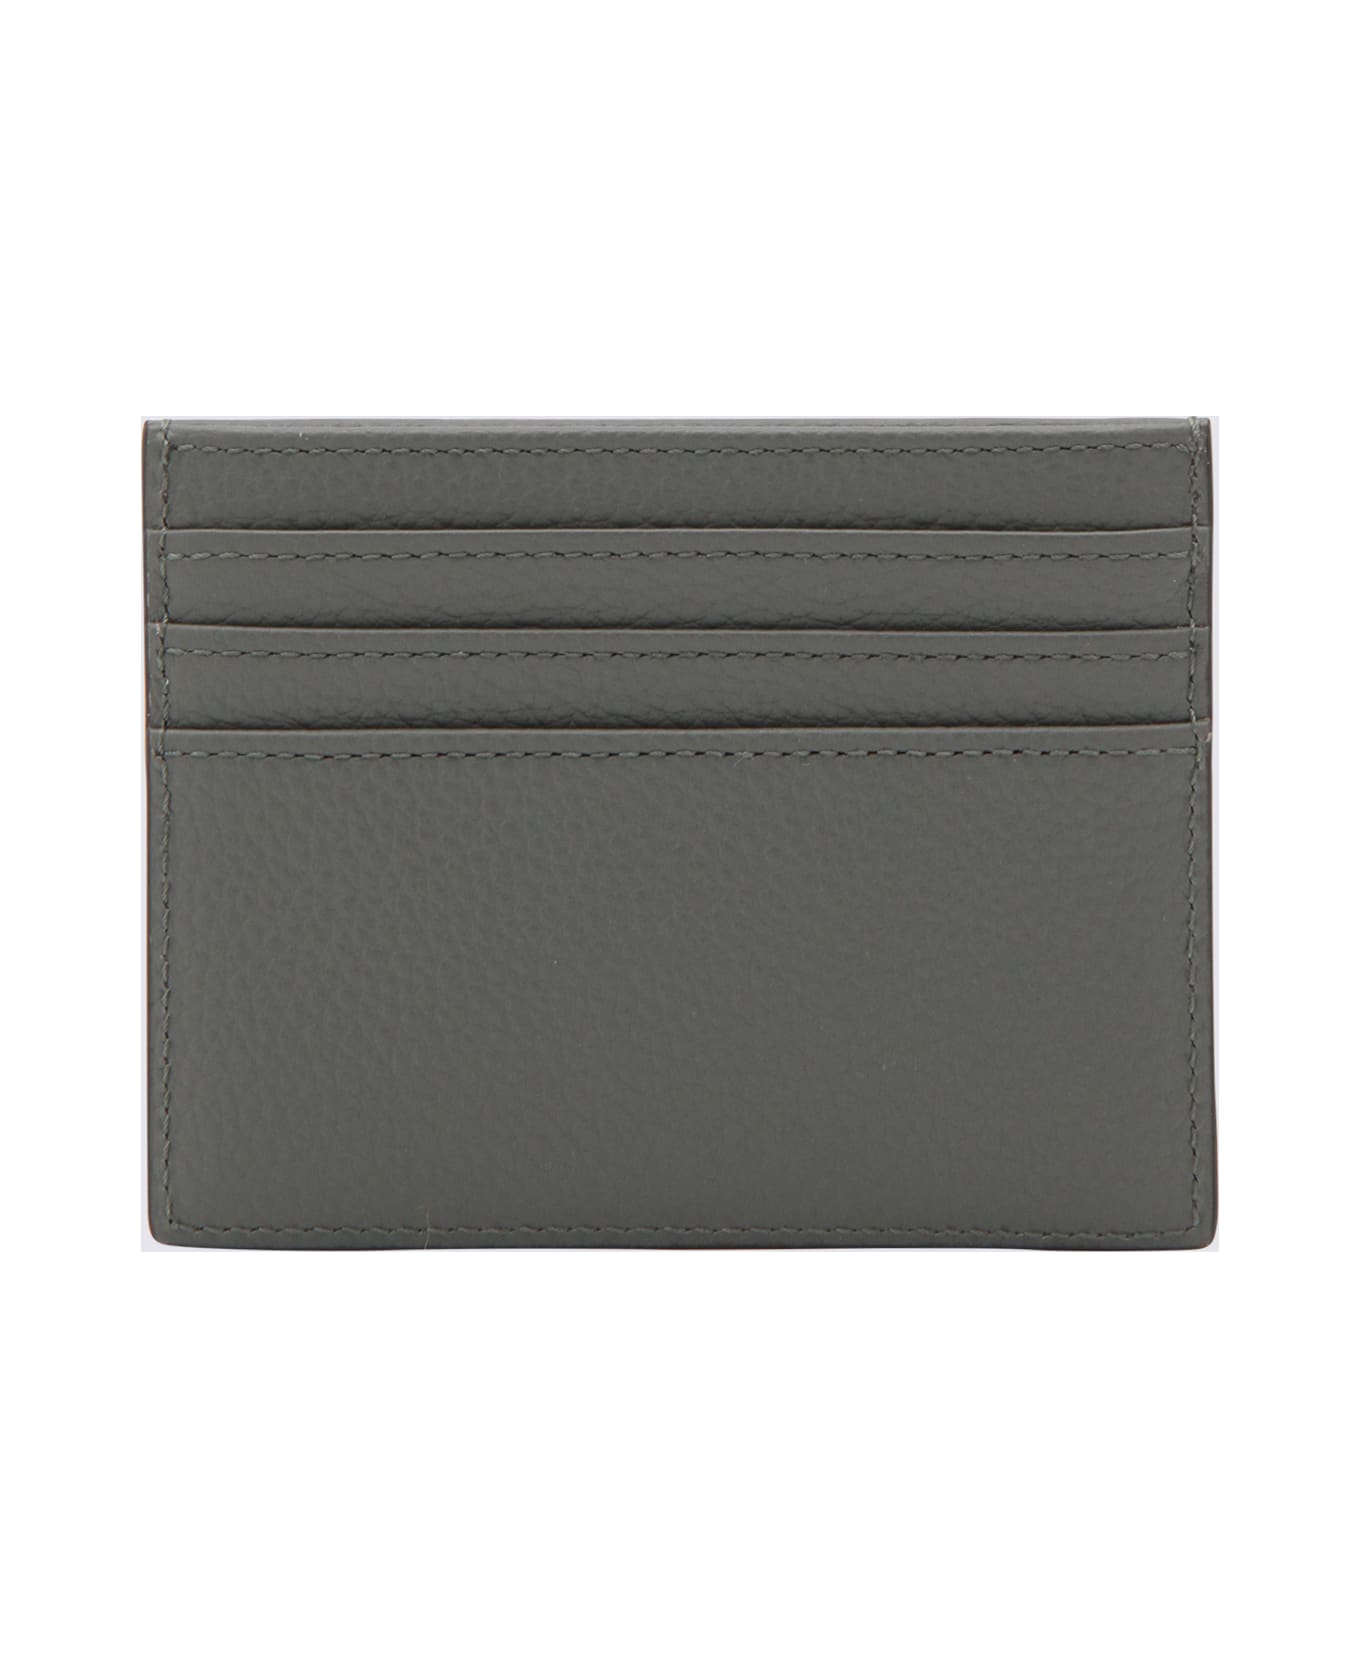 Mulberry Grey Leather Cardholder - CHARACOAL